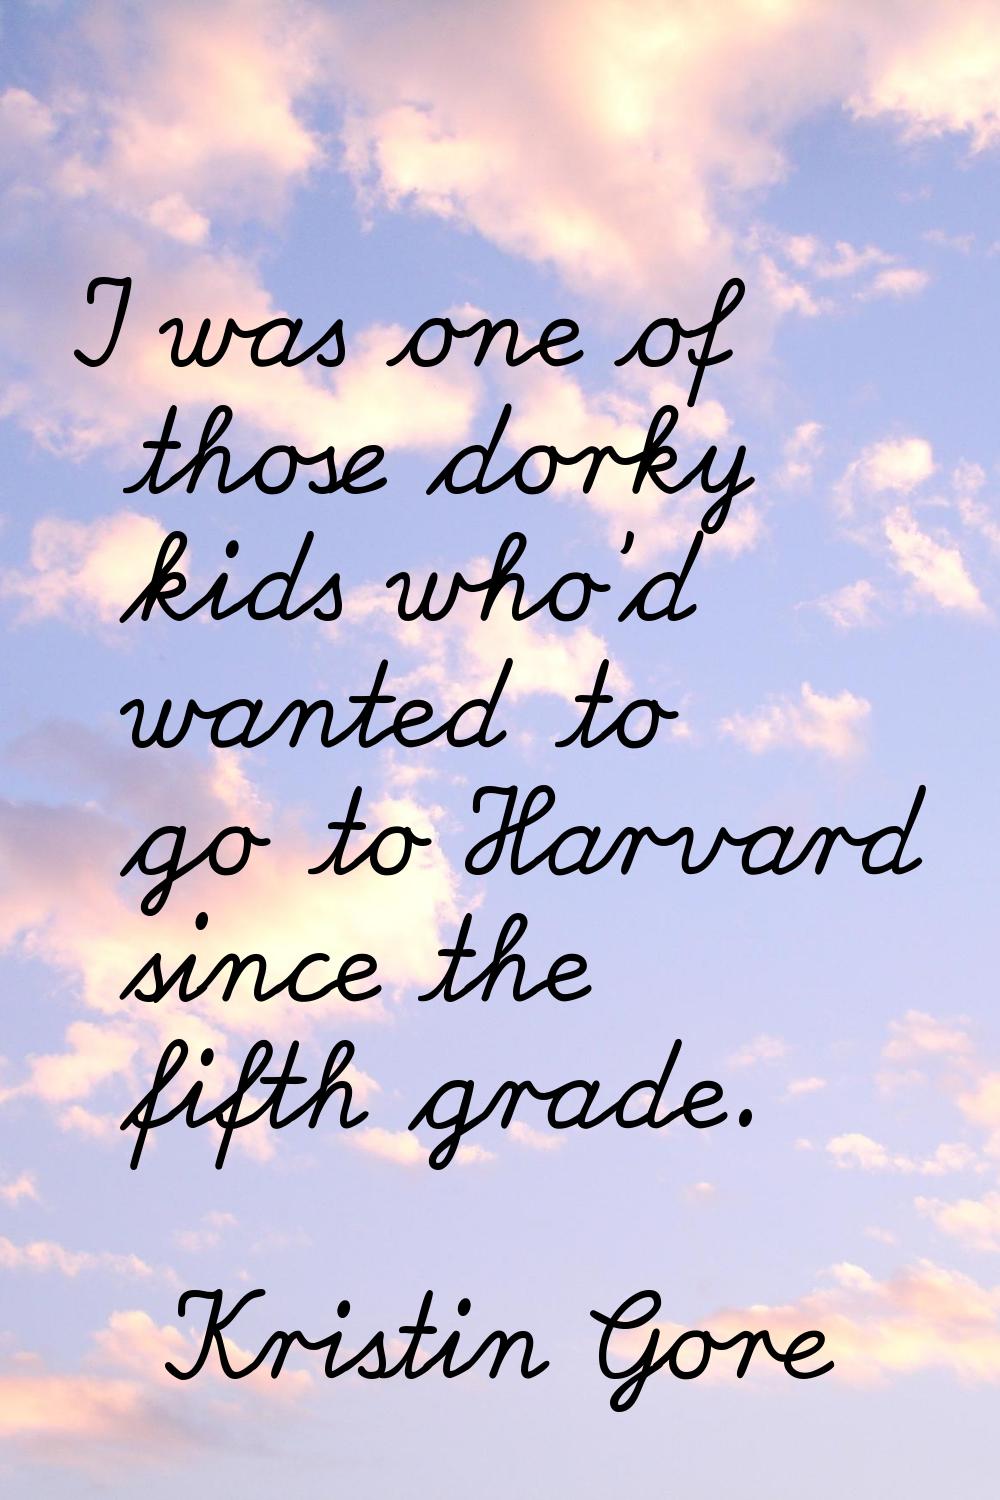 I was one of those dorky kids who'd wanted to go to Harvard since the fifth grade.